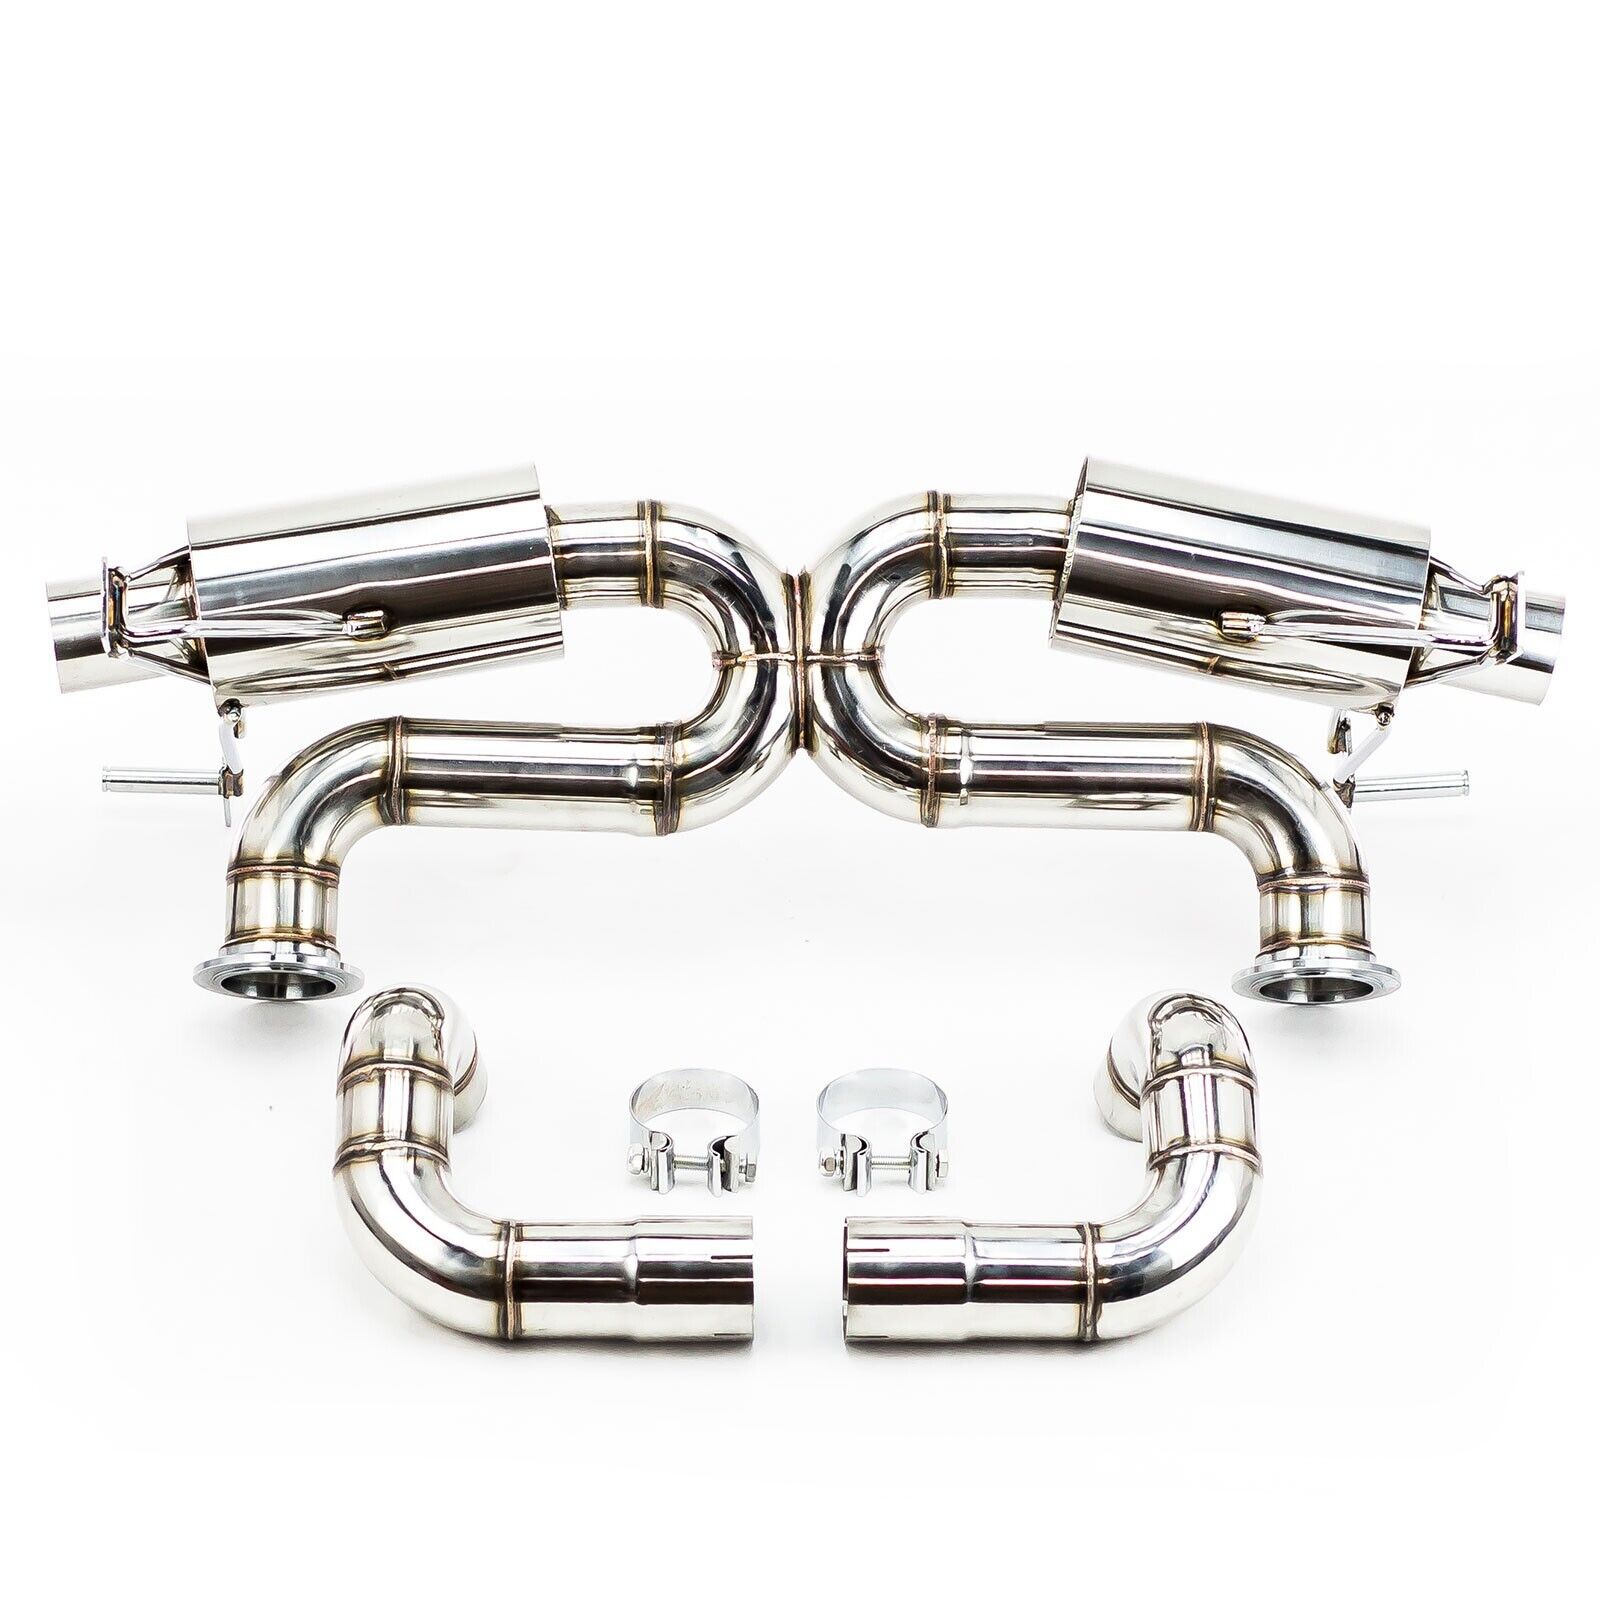 Rev9 Exhaust System, Stainless Steel, 2.75 Inch, Audi R8 5.2L V8 2008-2012